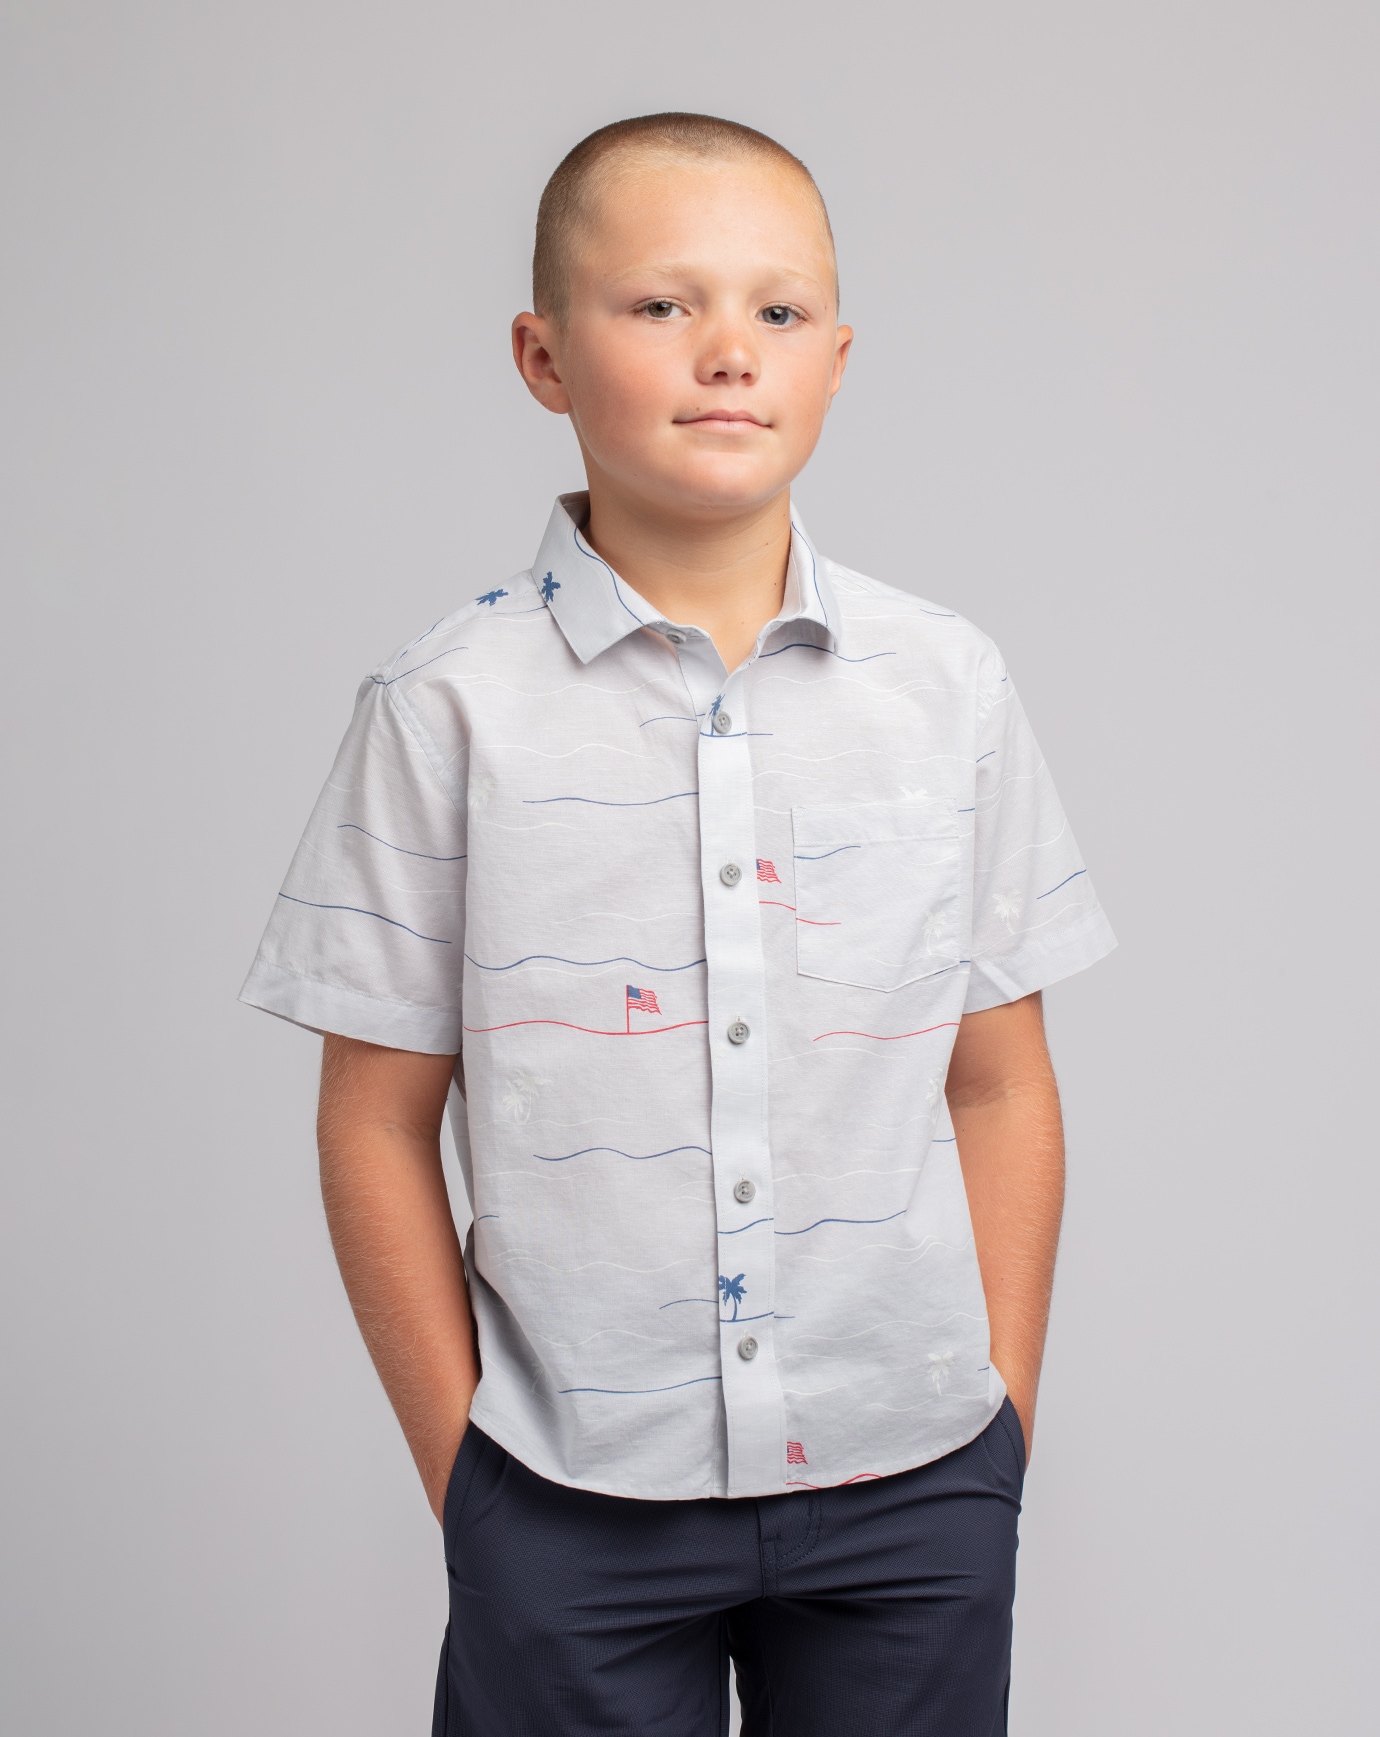 STAR SPANGLED BANNER YOUTH BUTTON-UP_1BS120_0HMC_